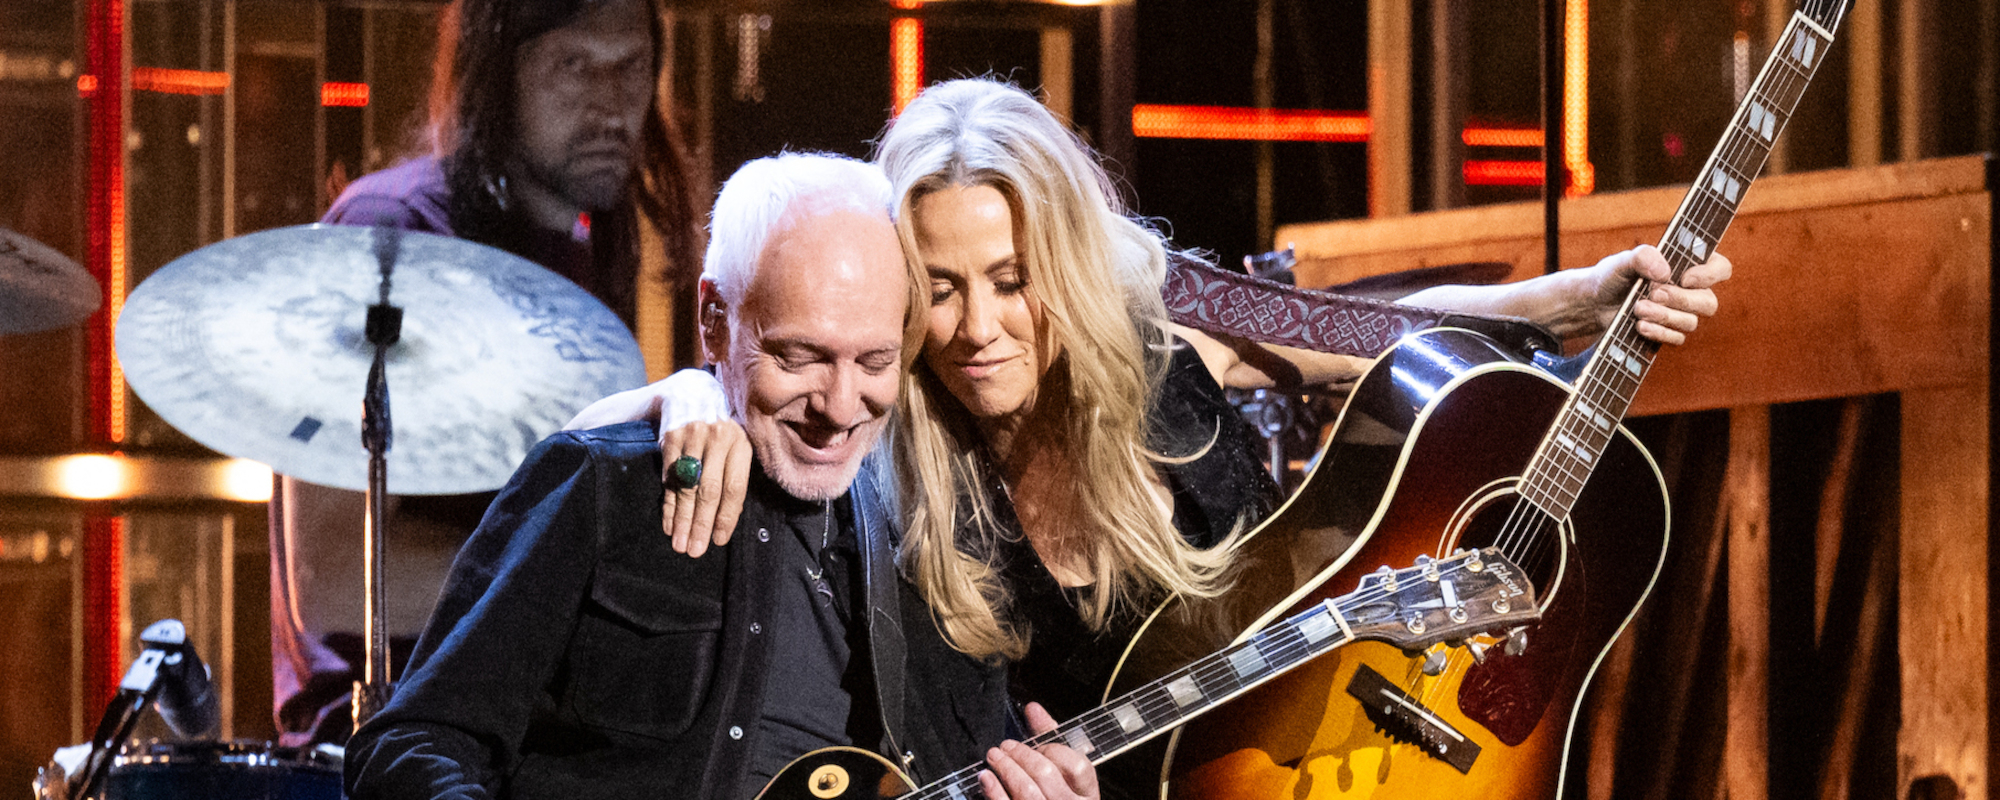 See Photos from the 2023 Rock & Roll Hall of Fame Induction—Sheryl Crow, Peter Frampton, Stevie Nicks, Chaka Khan and More